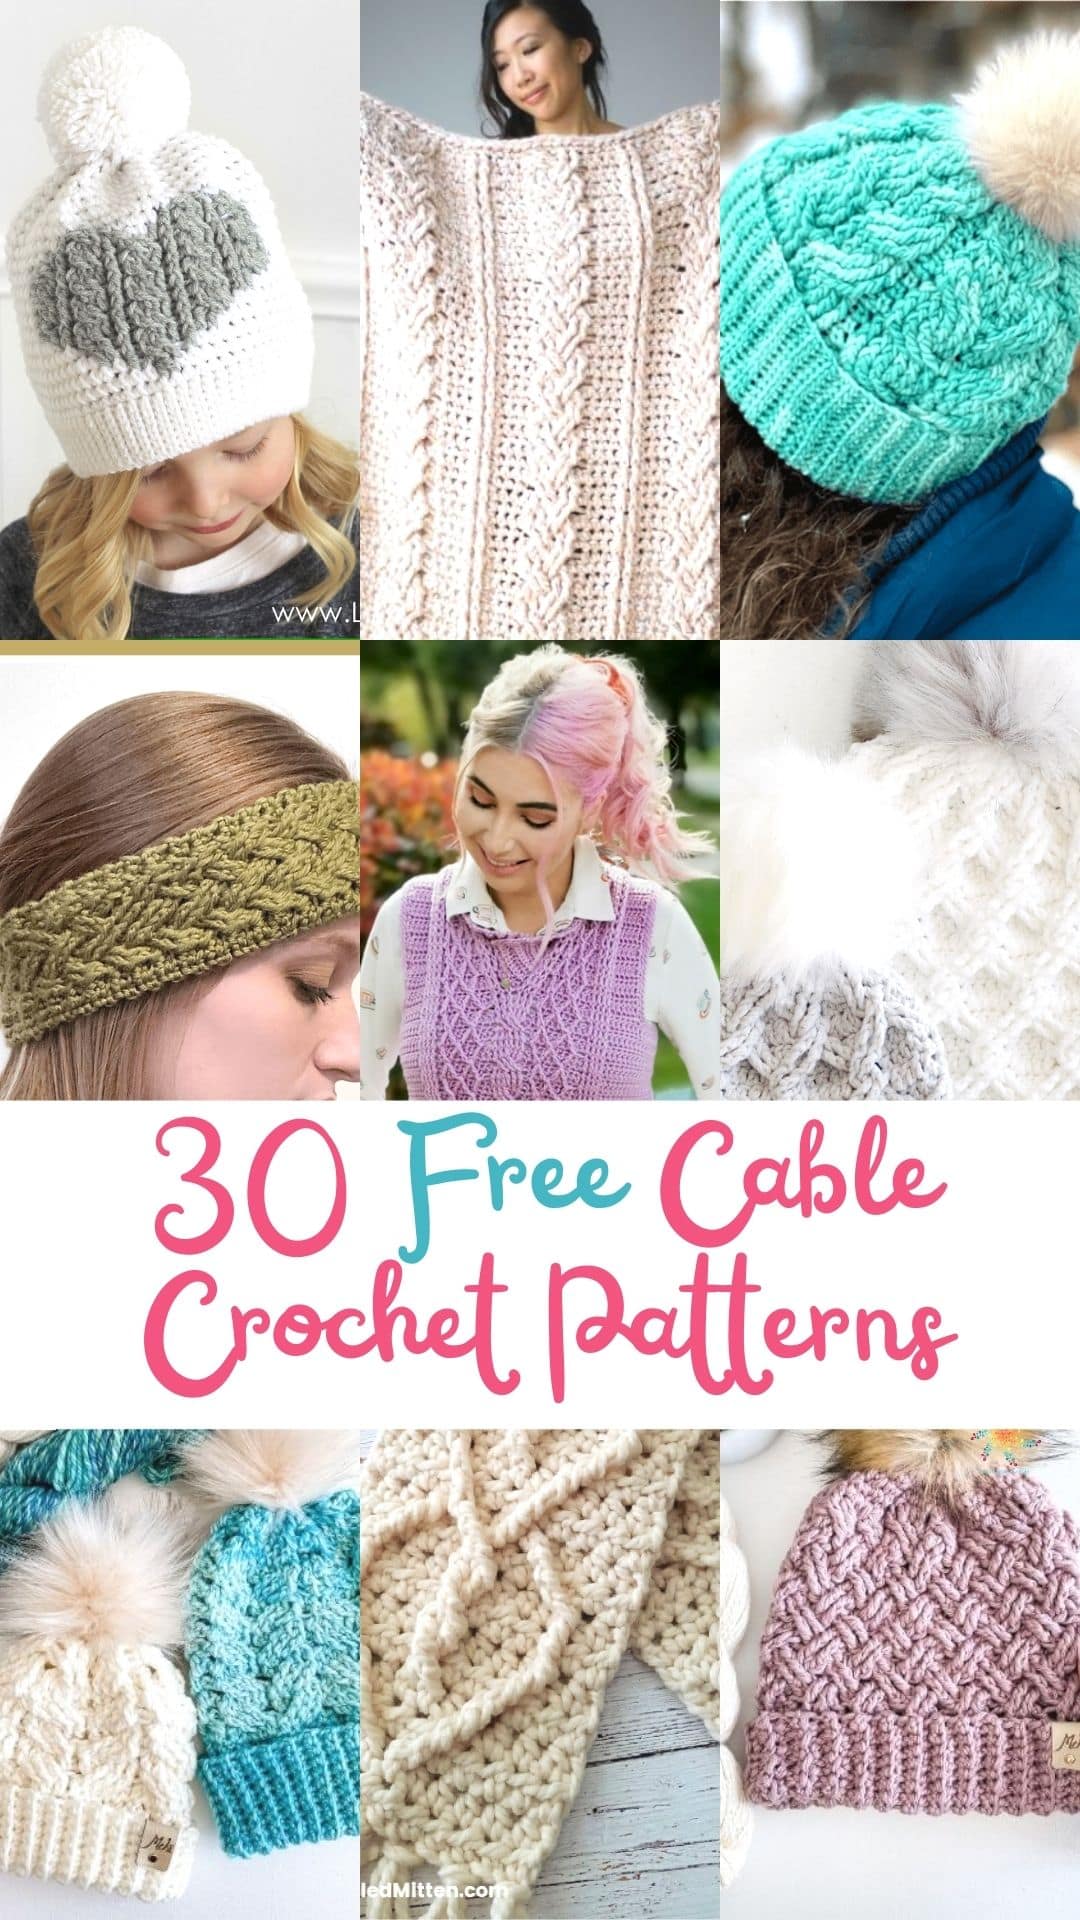 30 free cable crochet patterns